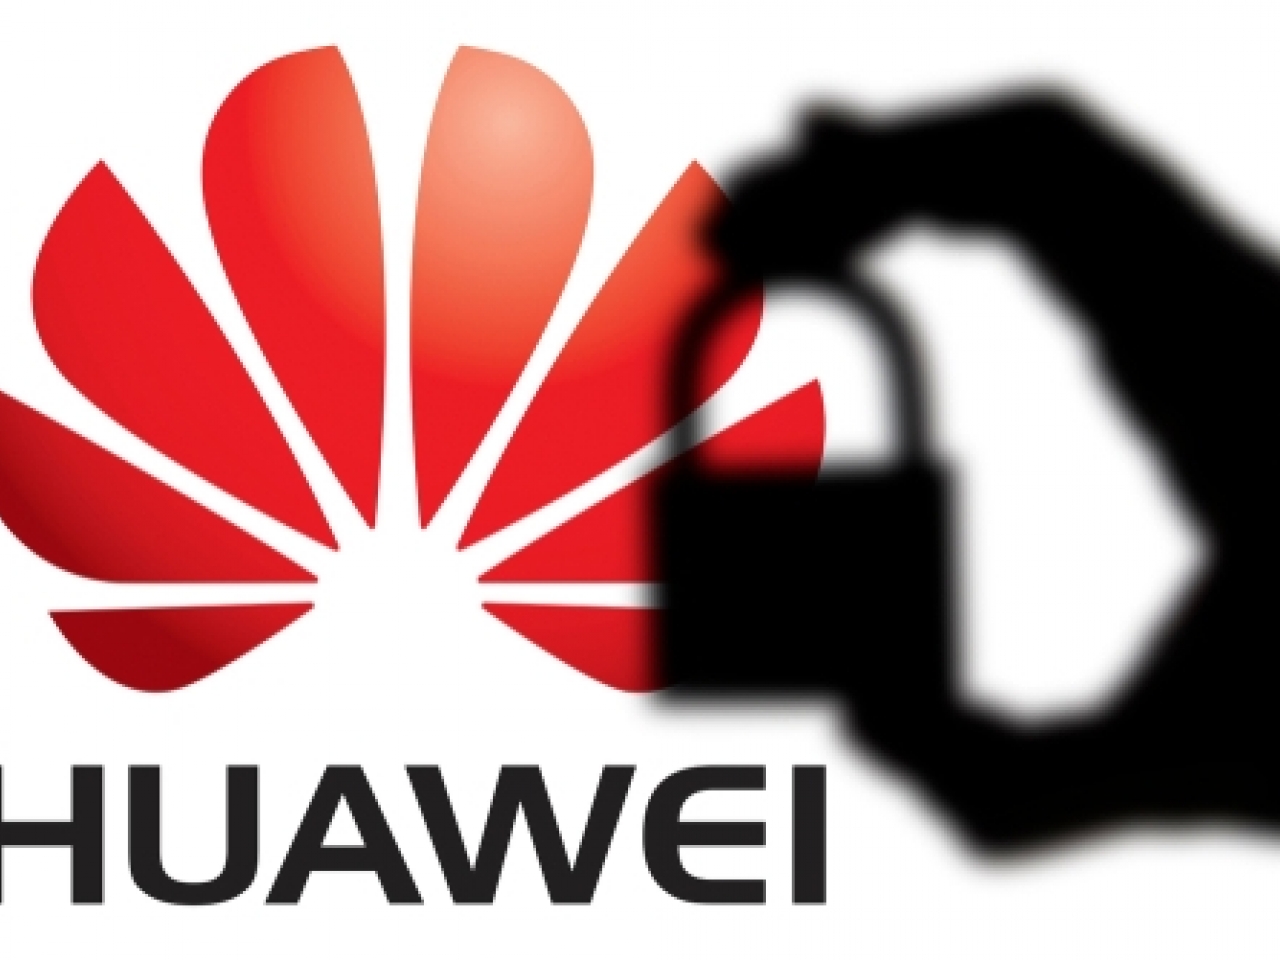 Huawei said supply chain attacked by US, urges Washington to reconsider trade restrictions